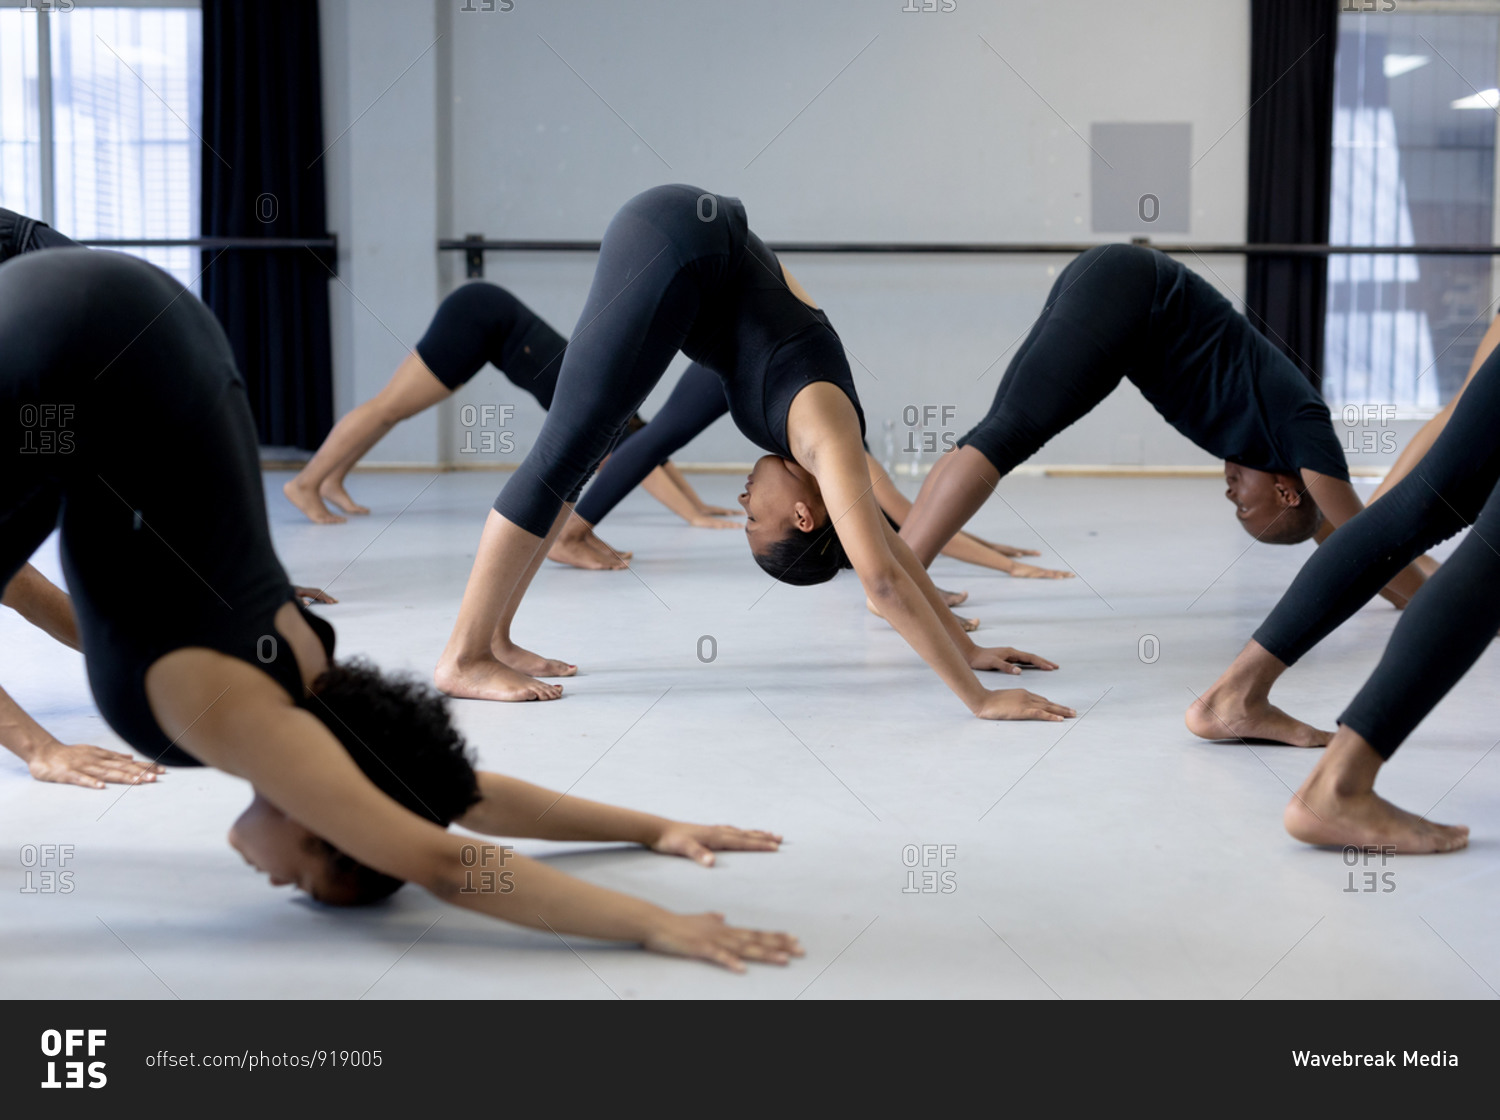 Side view of a multi-ethnic group of fit male and female modern dancers wearing black outfits practicing a dance routine during a dance class in a bright studio, stretching up.